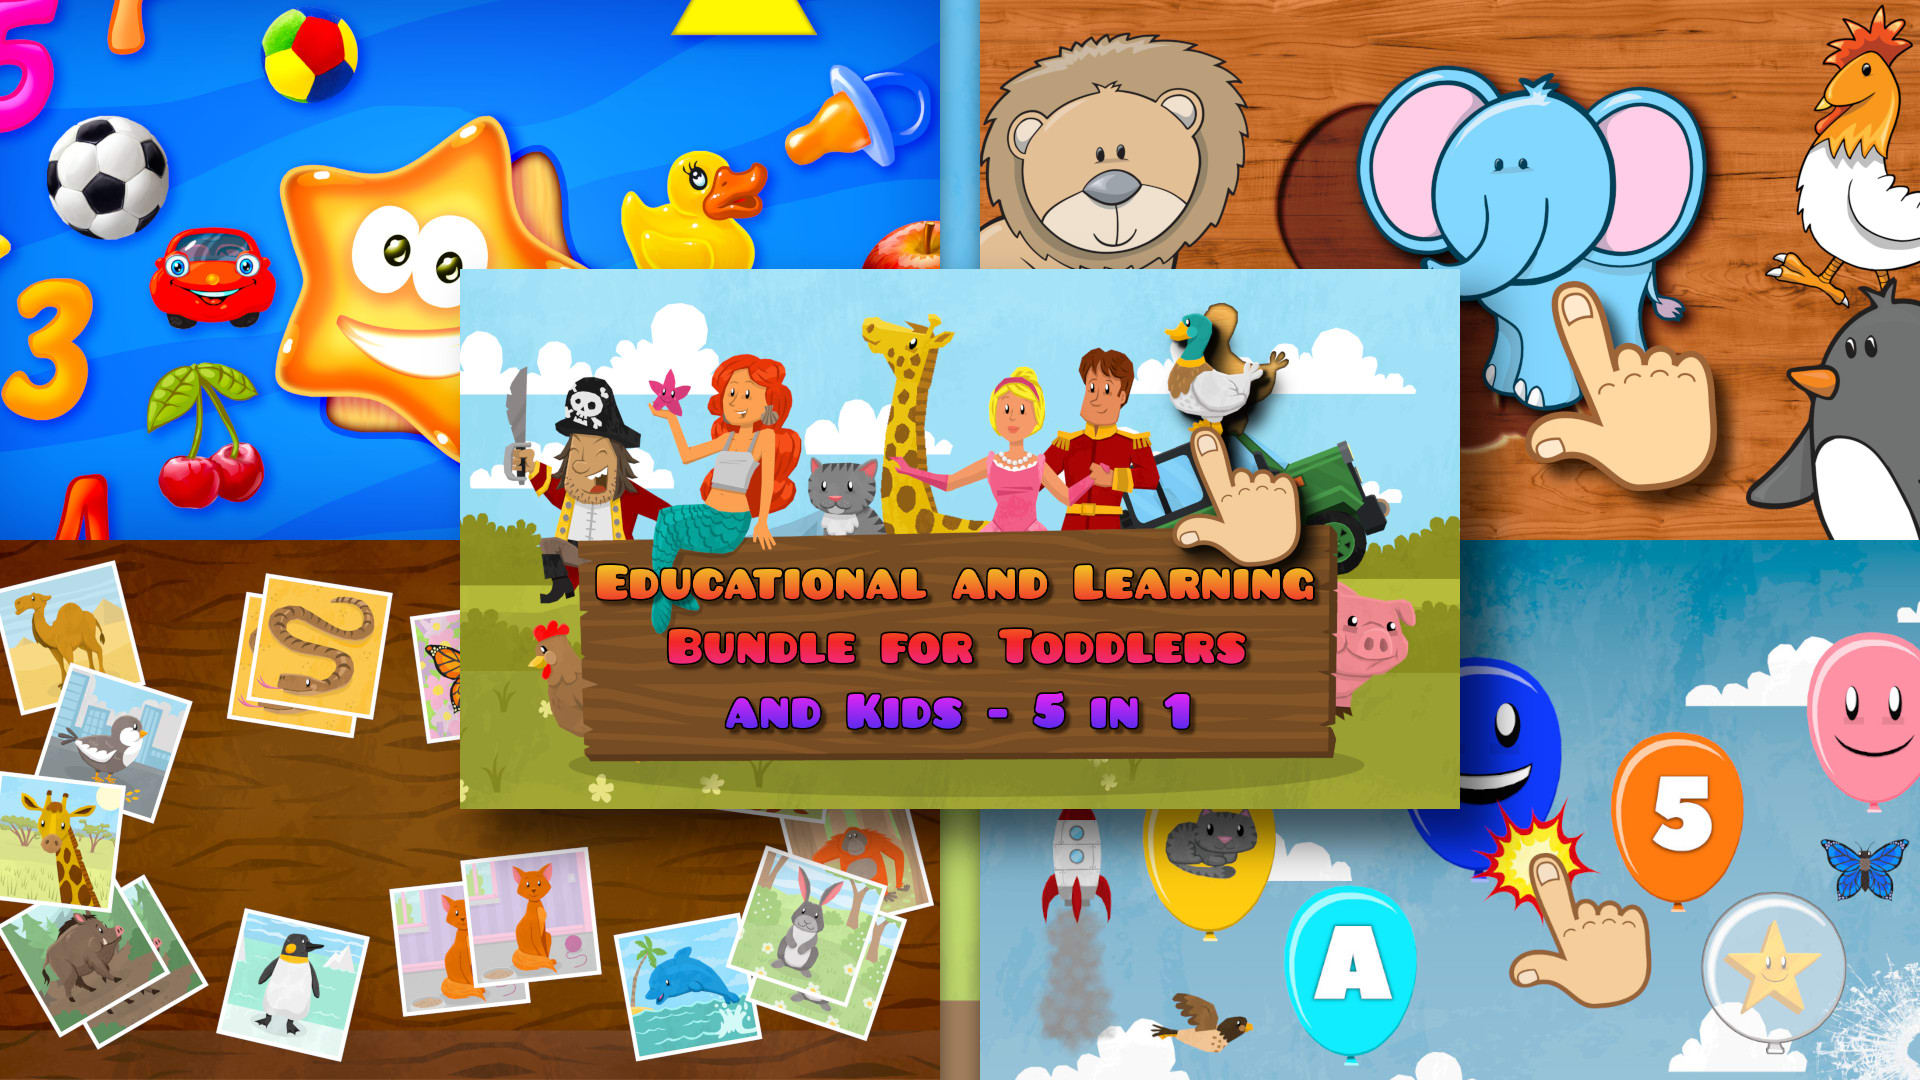 Educational and Learning Bundle for Toddlers and Kids - 5 in 1